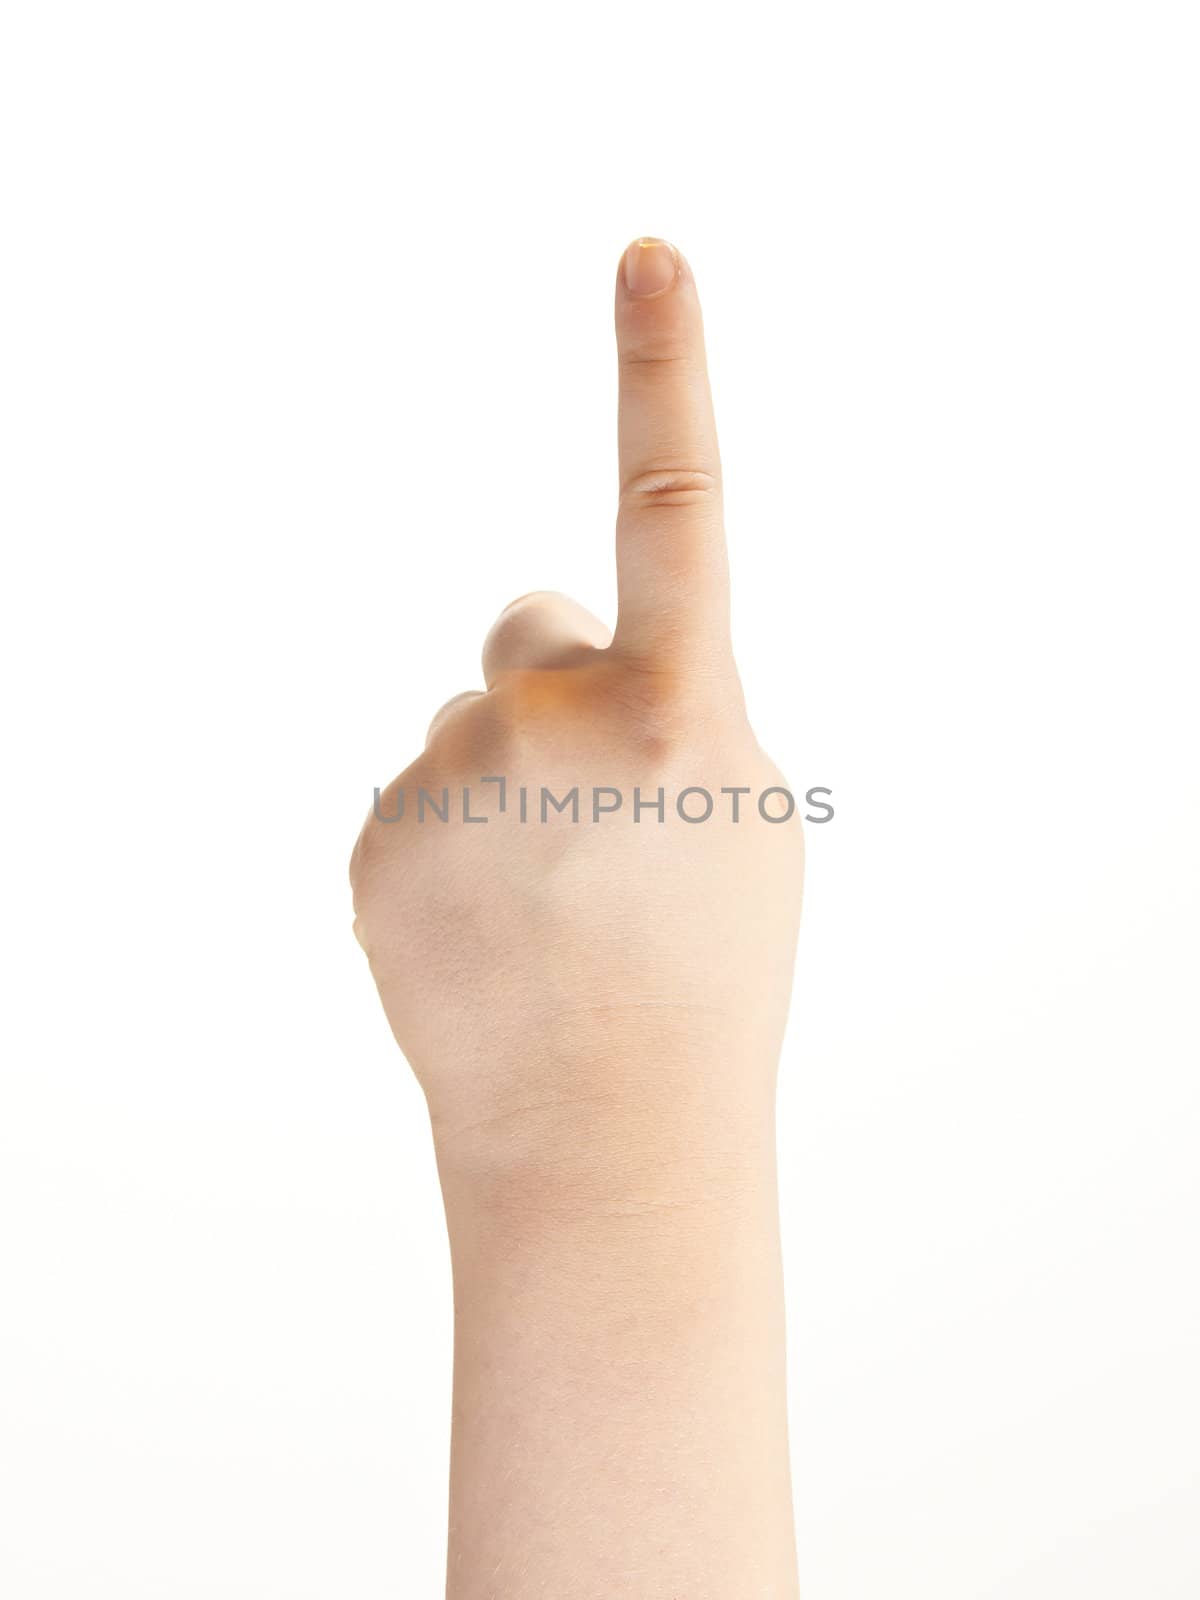 Childs index finger pointing - showing direction - on white background